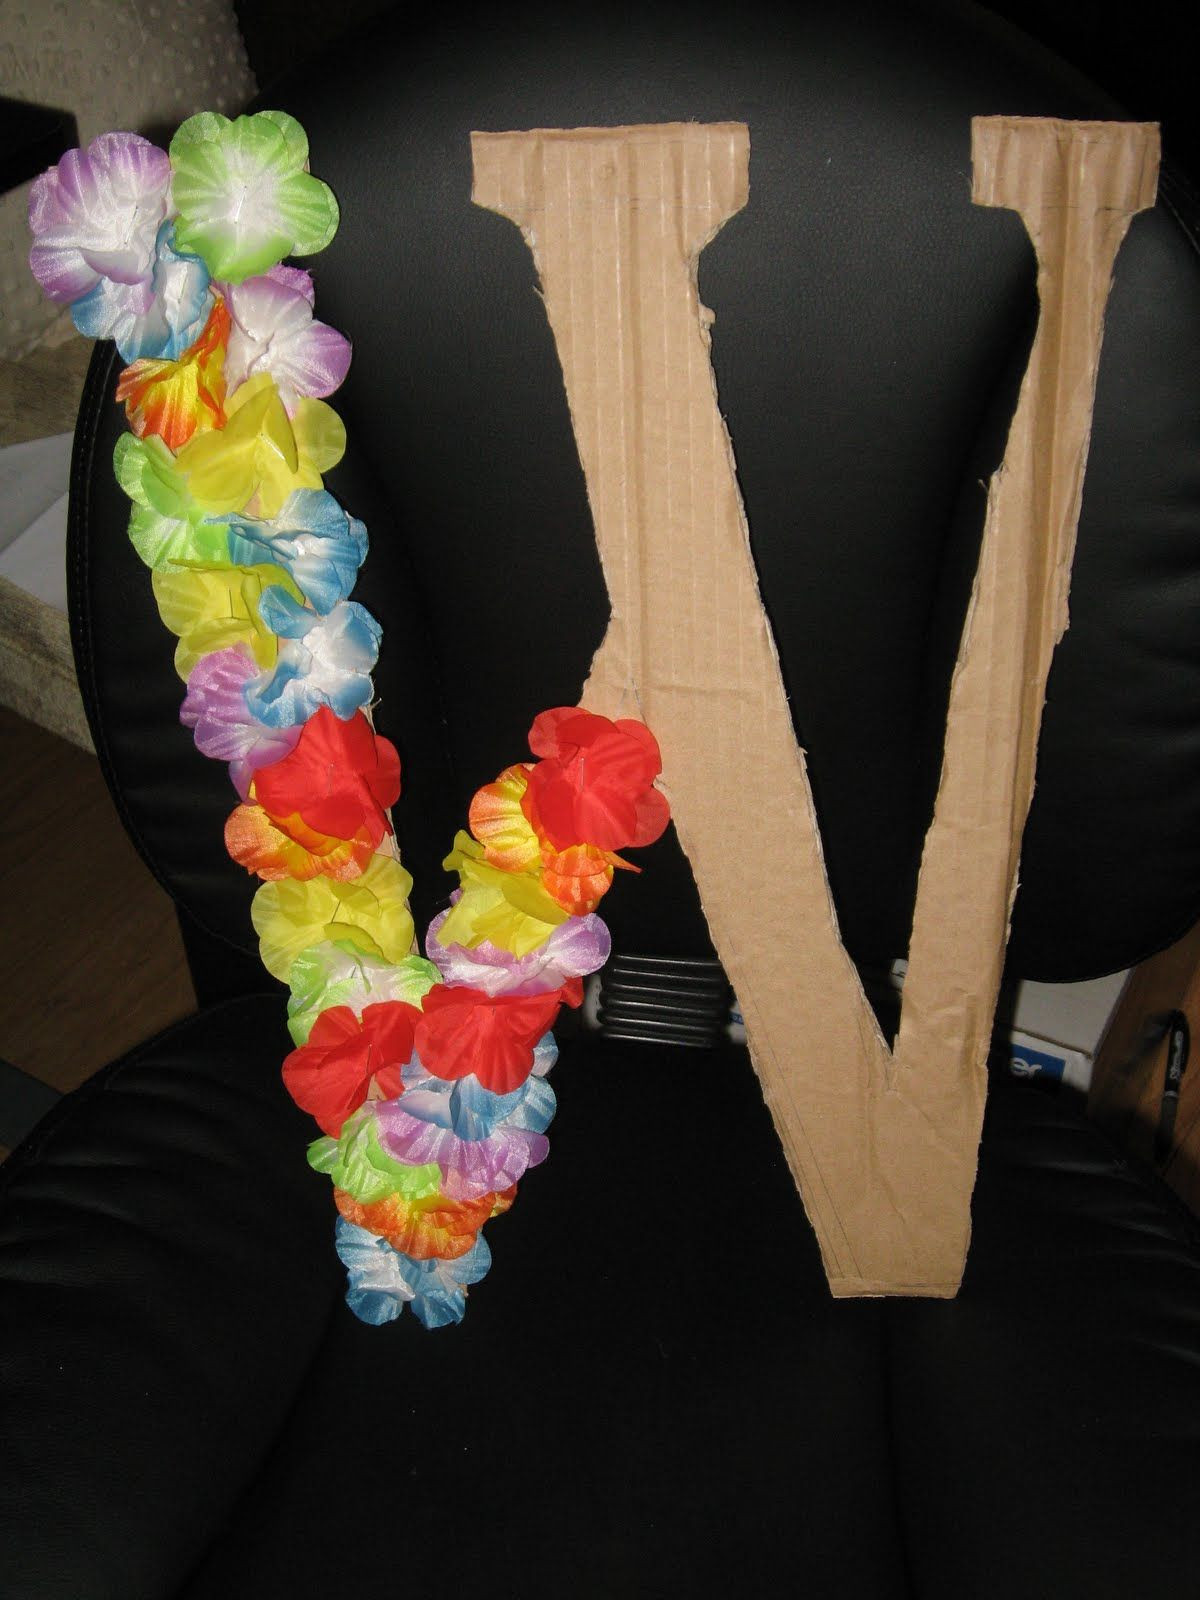 DIY Hawaiian Party Decorations
 diy luau decorations This idea could be used to mark the